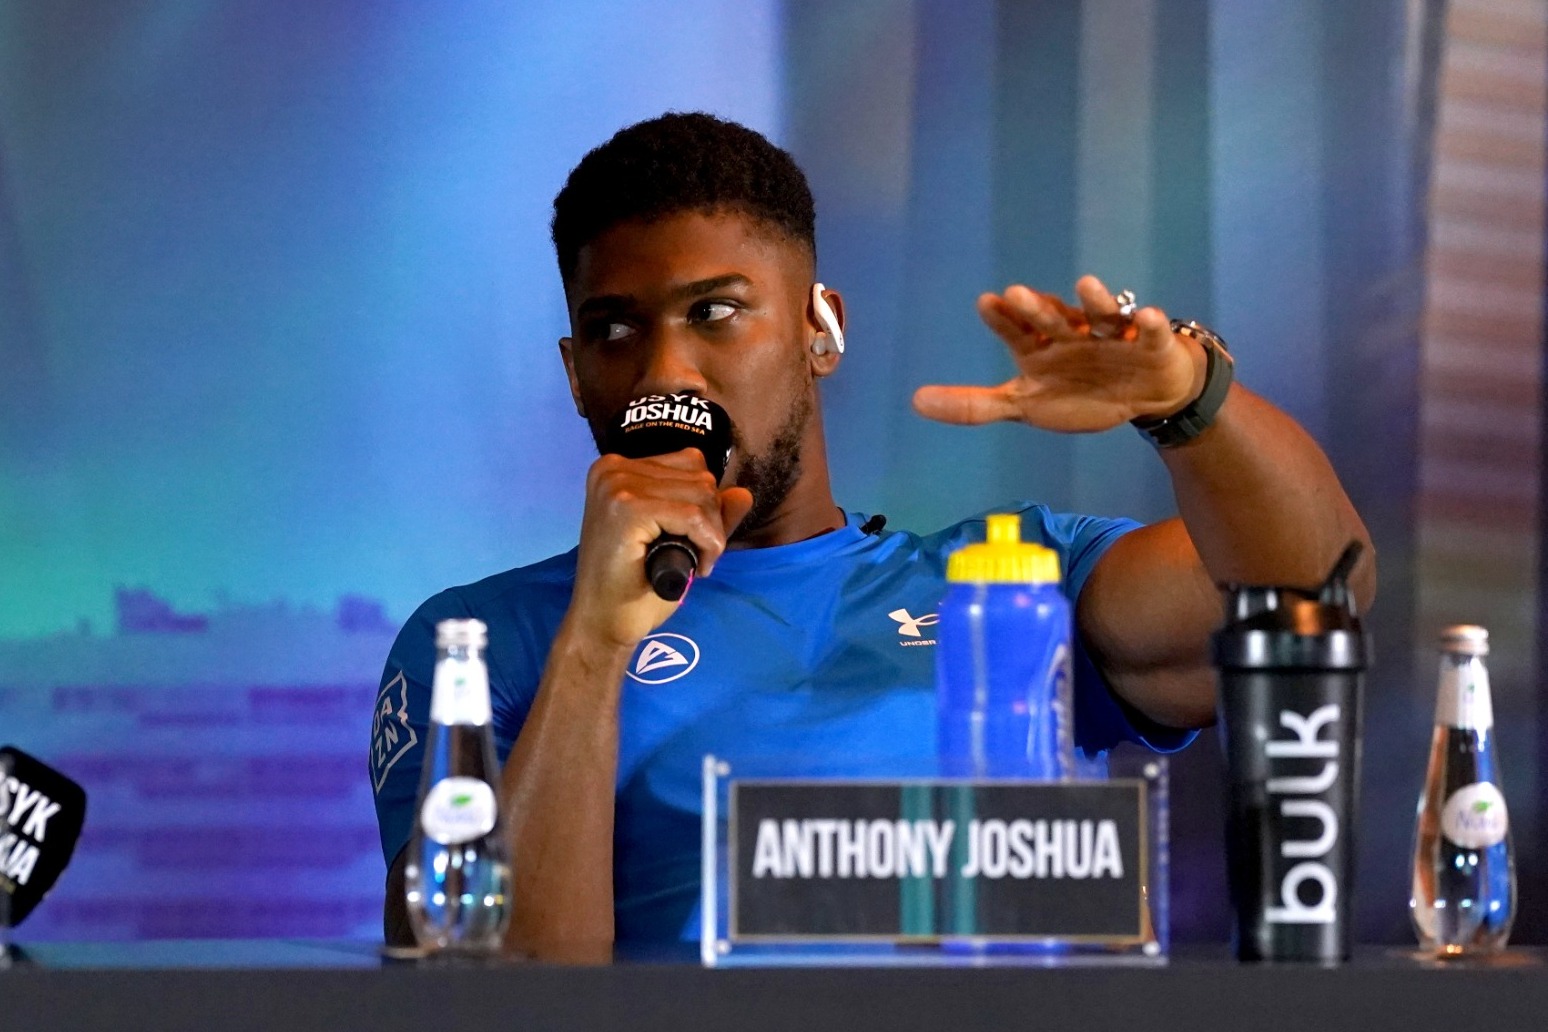 It’s up to me – Anthony Joshua will decide when his boxing career ends 